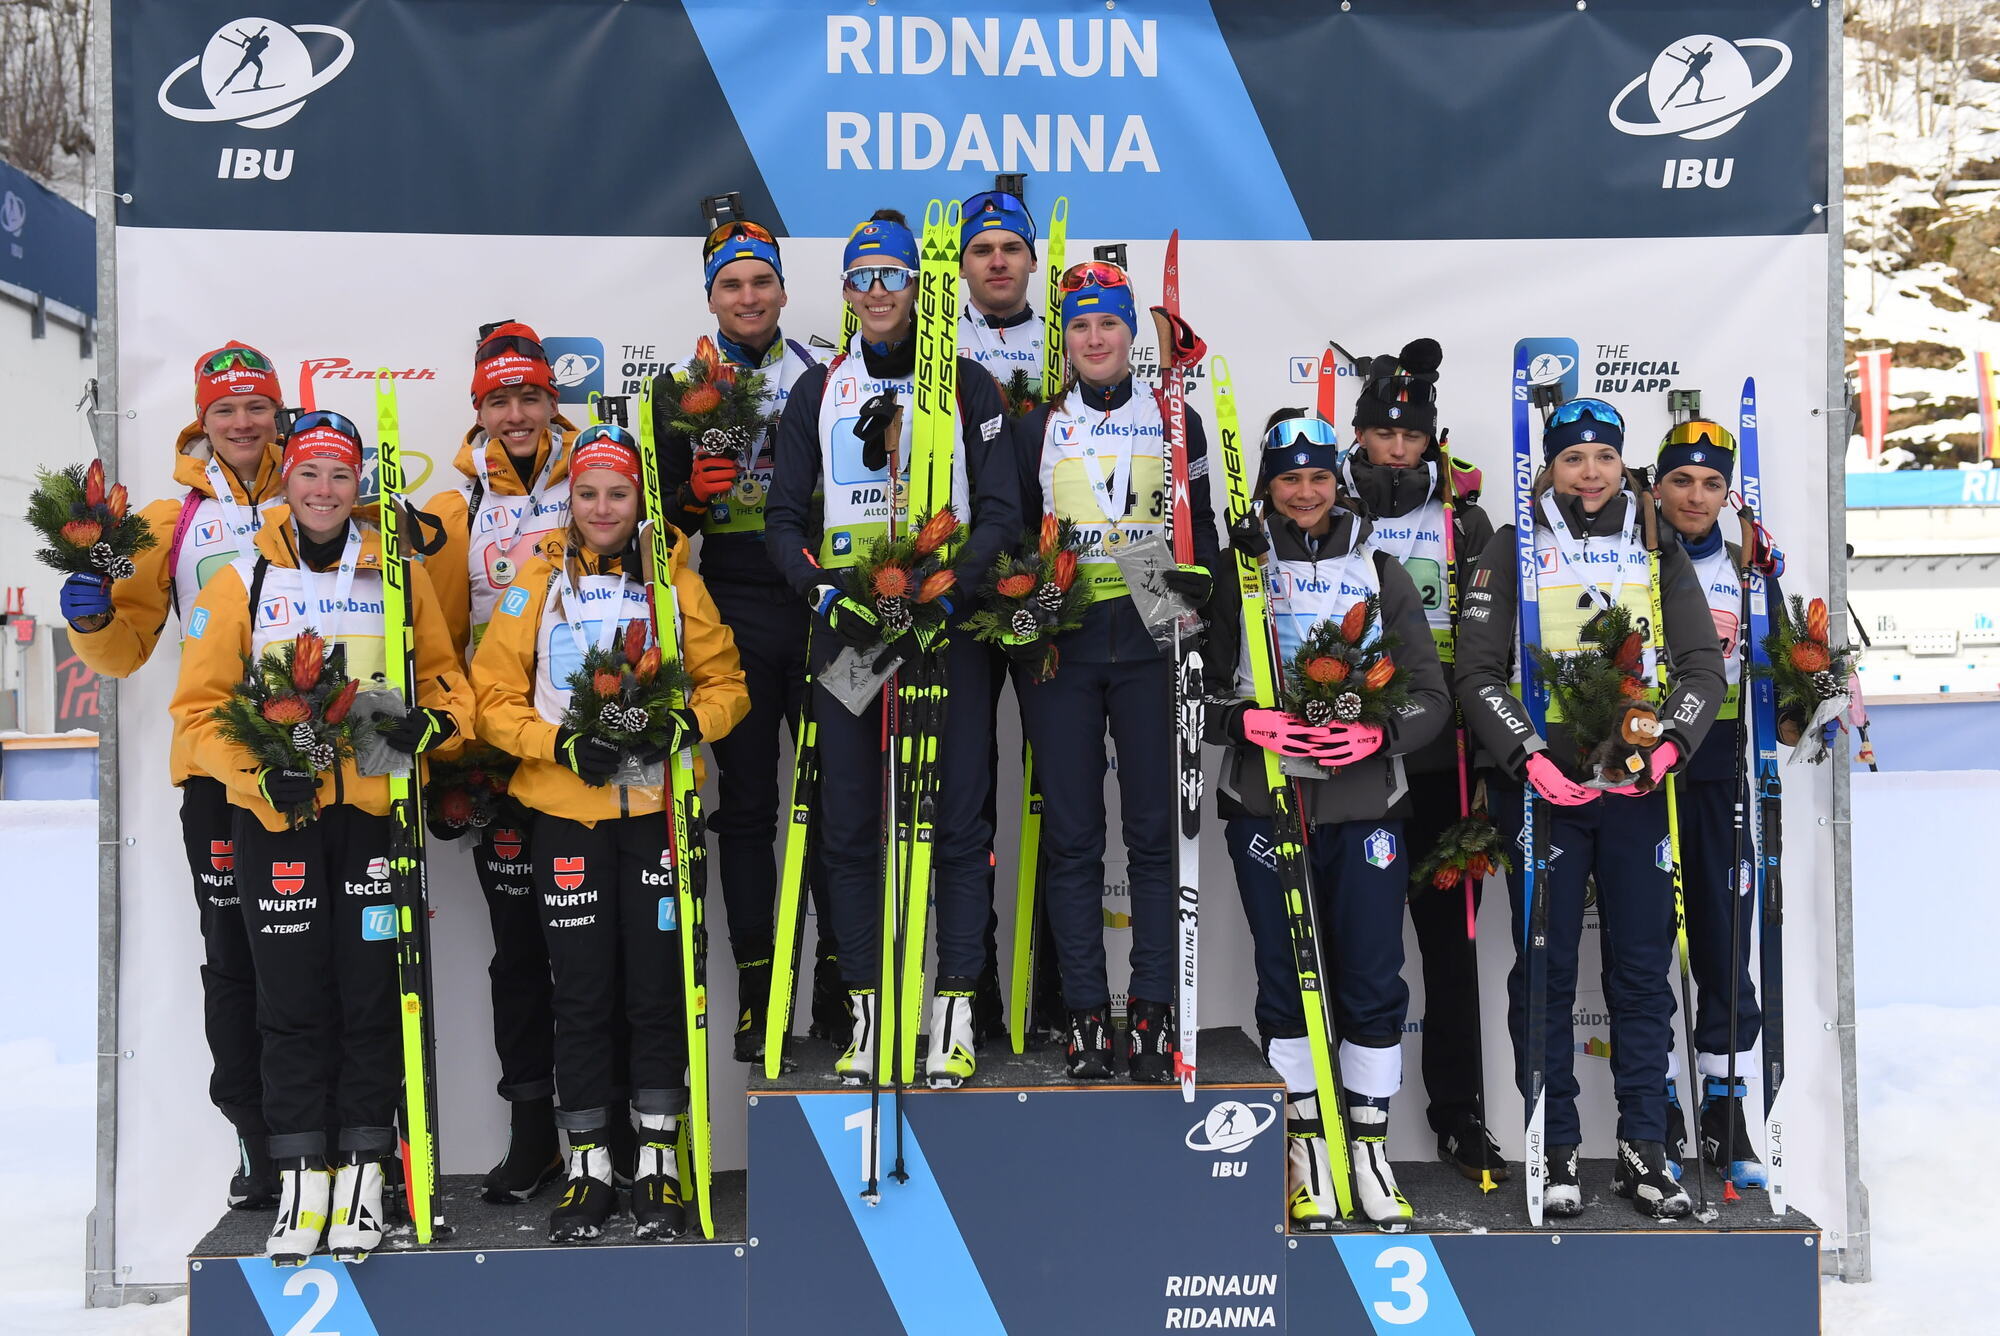 Ukrainian biathlon team with a record-breaking result at the Biathlon World Cup